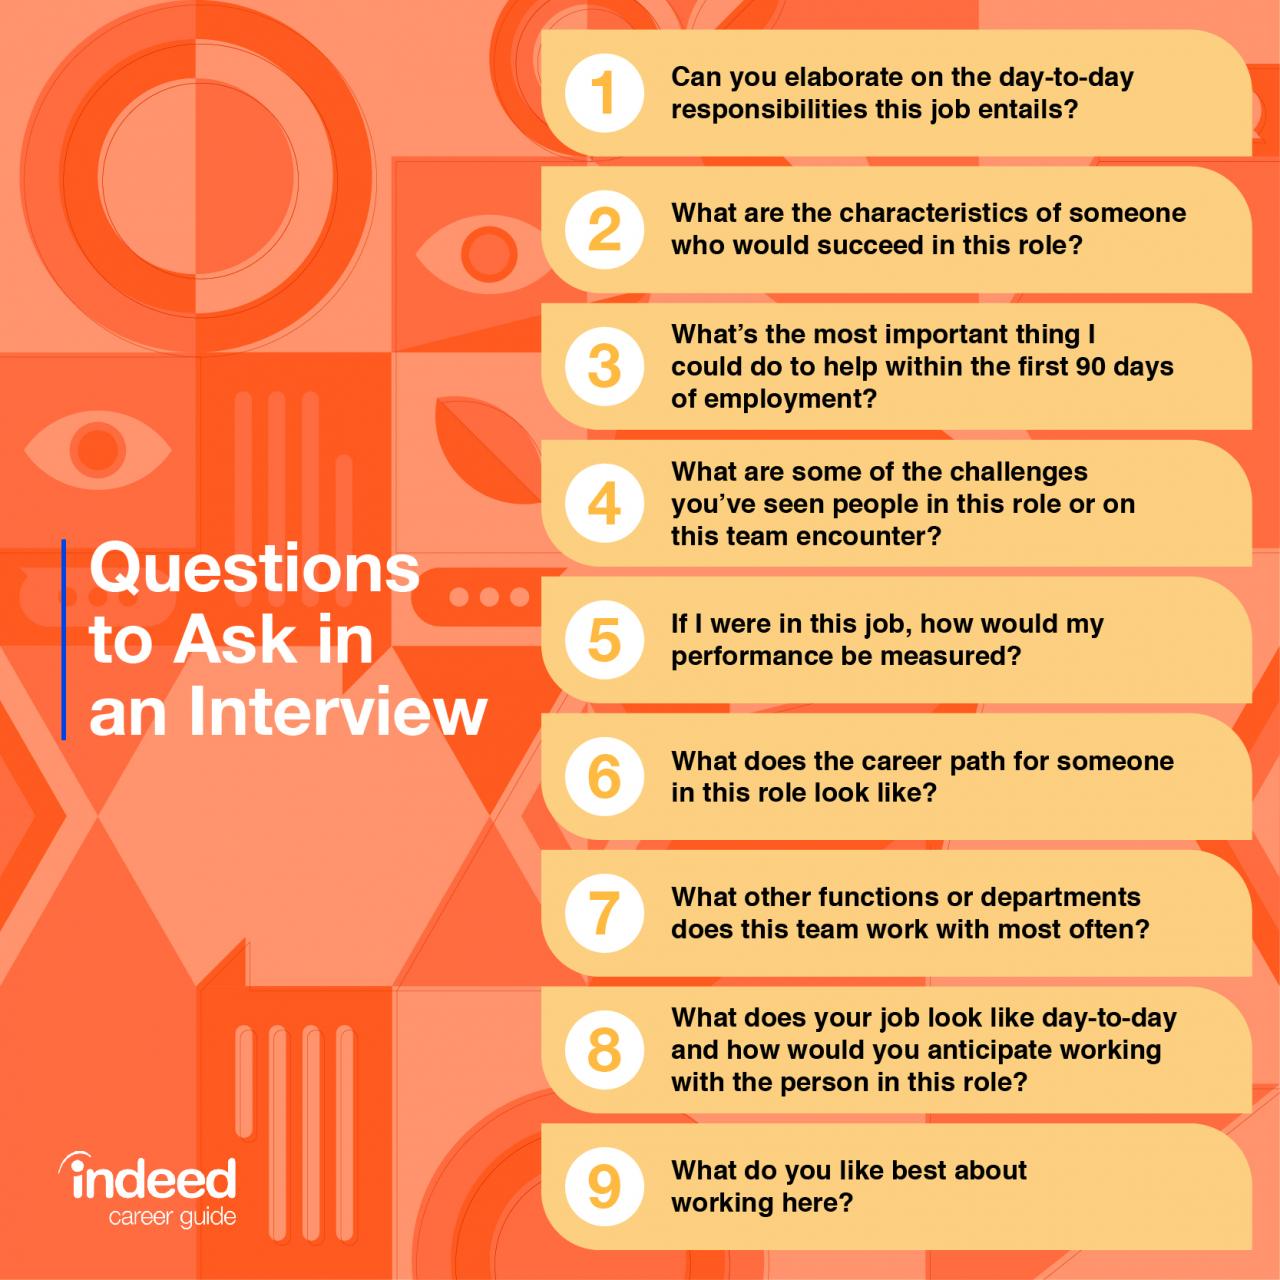 Questions to ask as an interviewer for a job